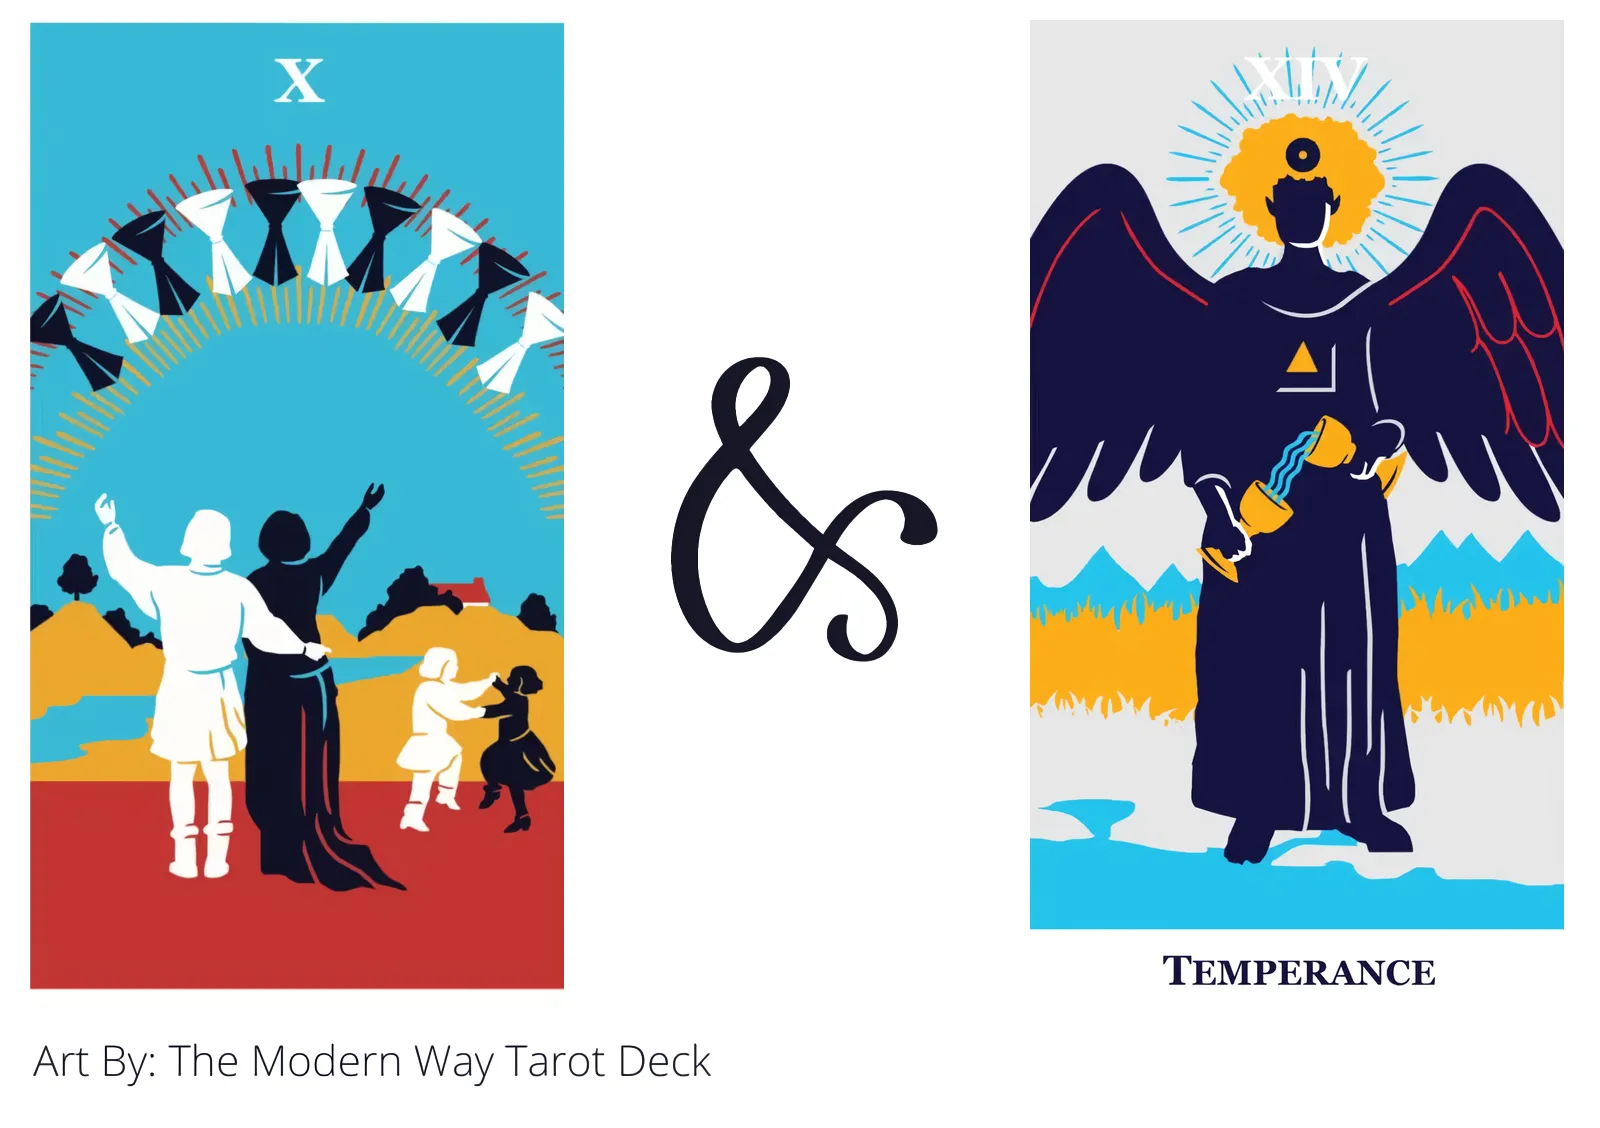 ten of cups and temperance tarot cards together